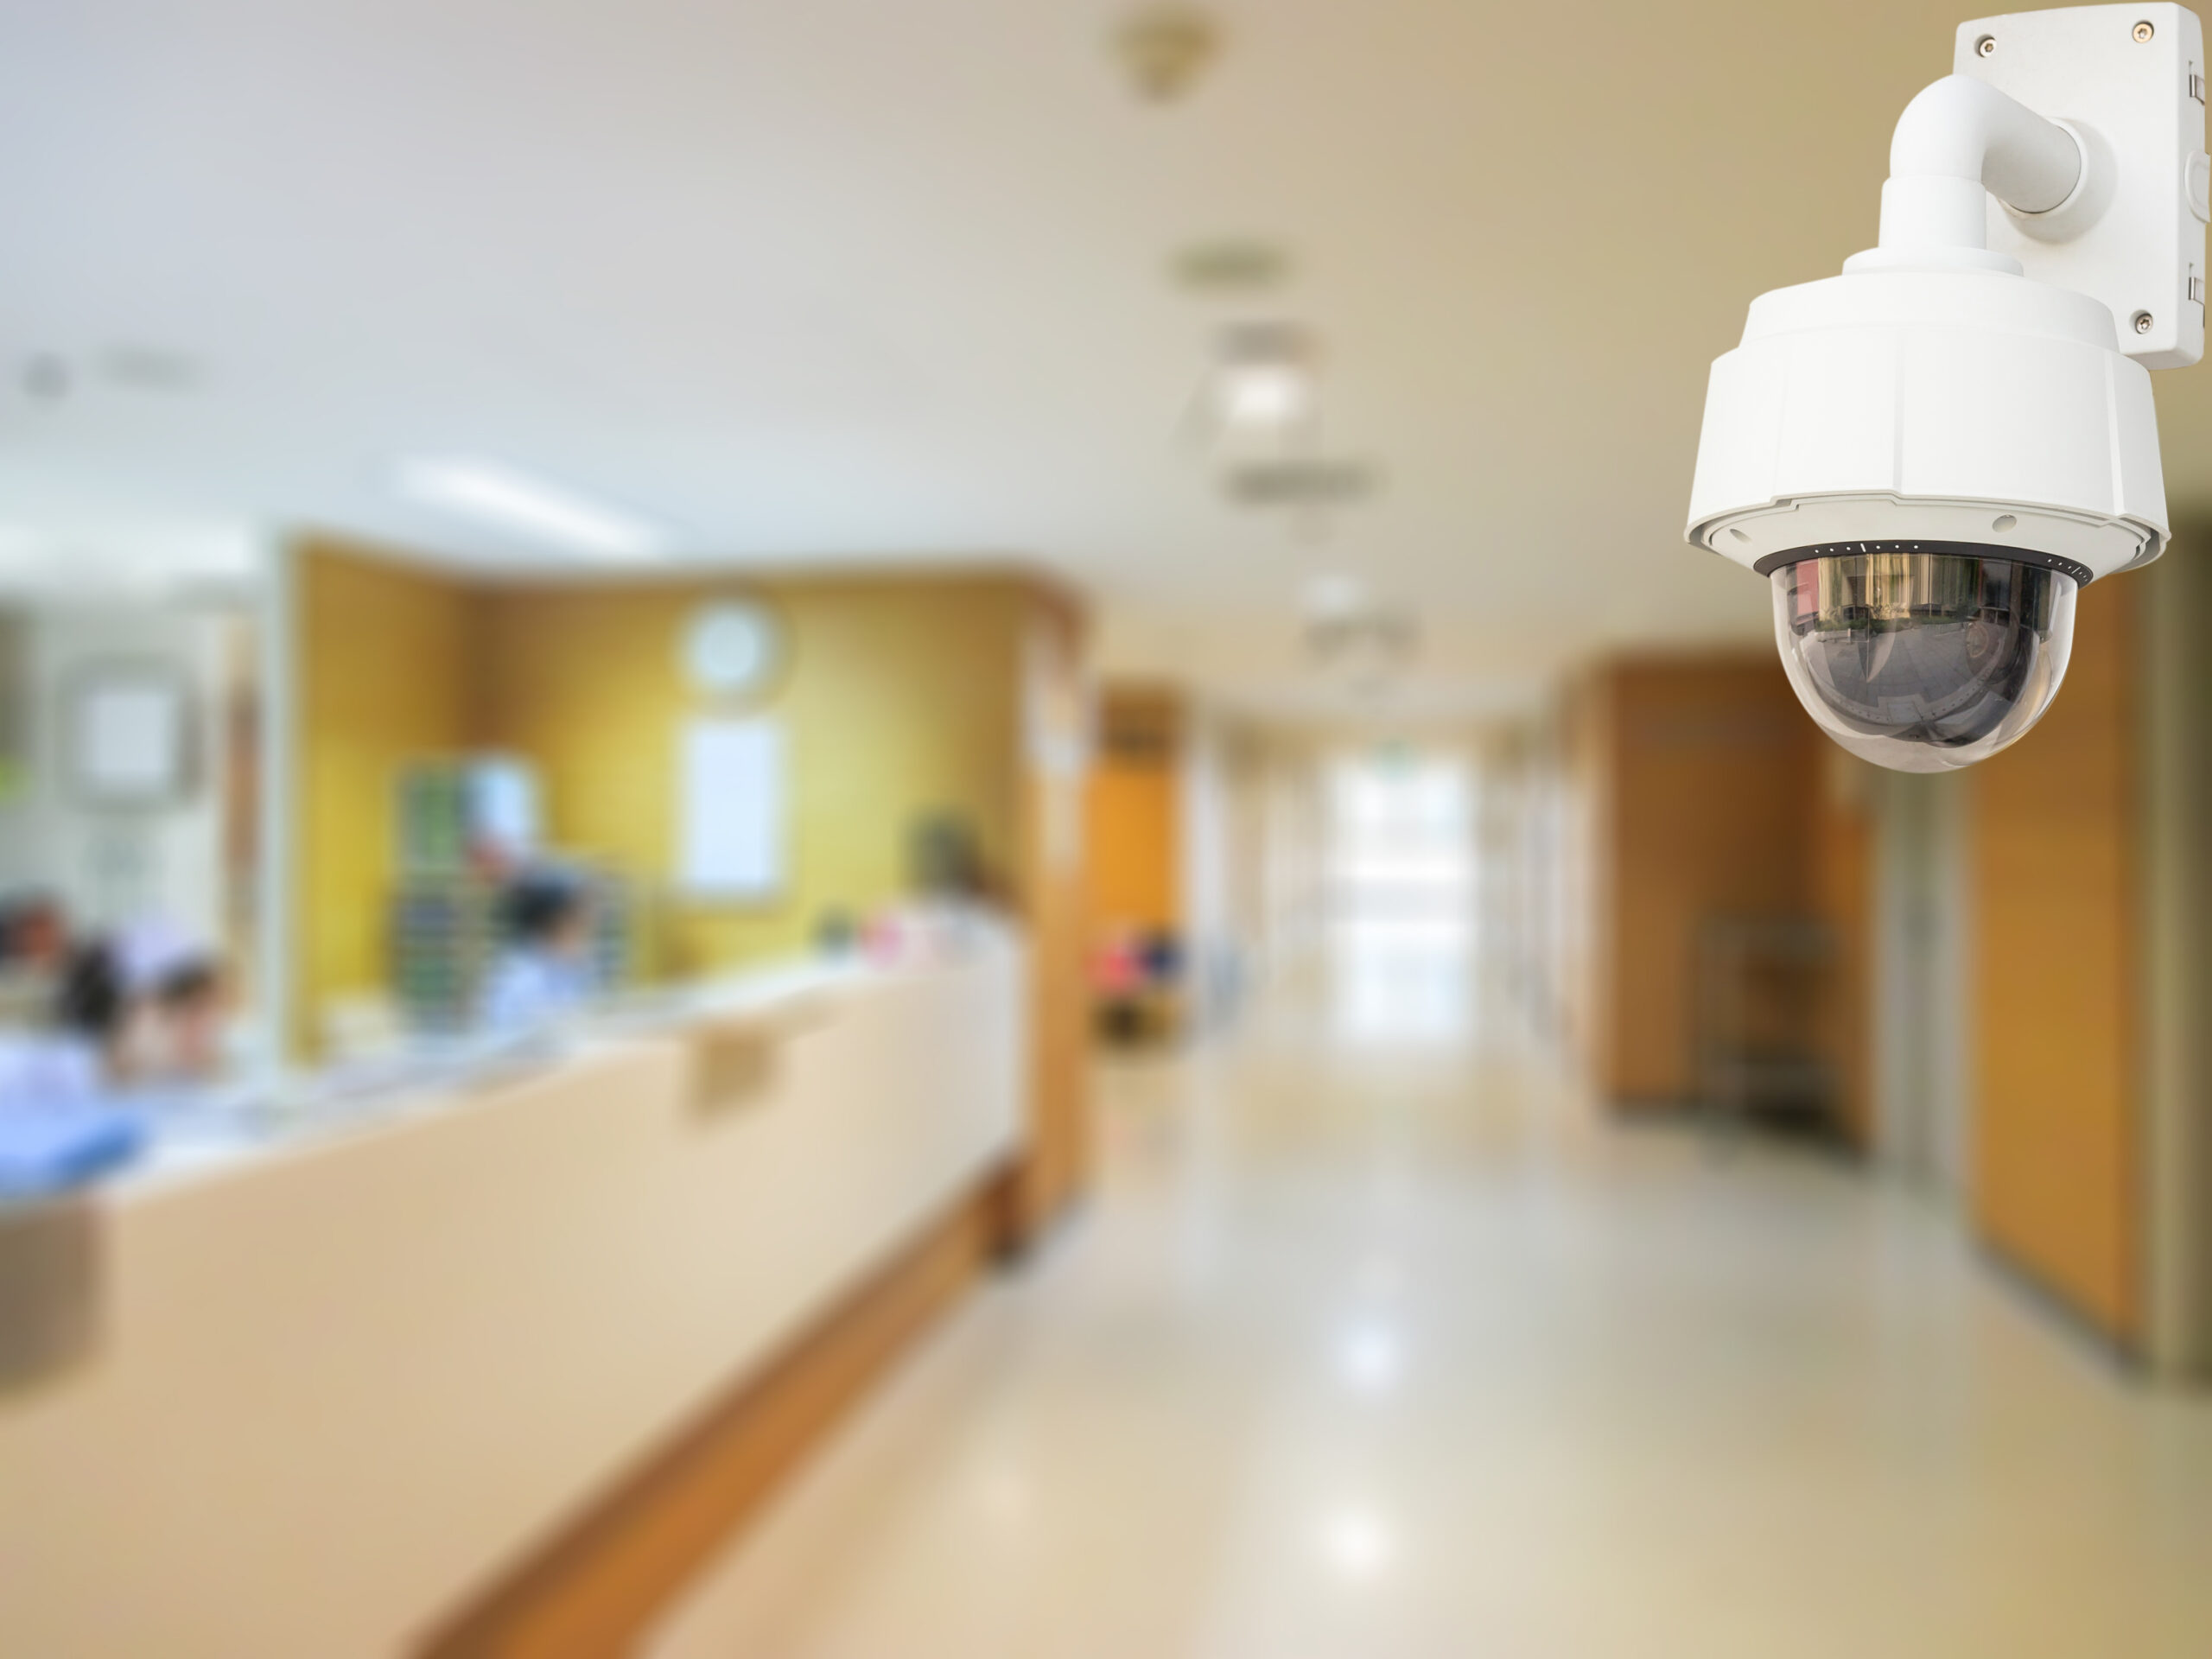 Cctv system security in working room of hospital blur background